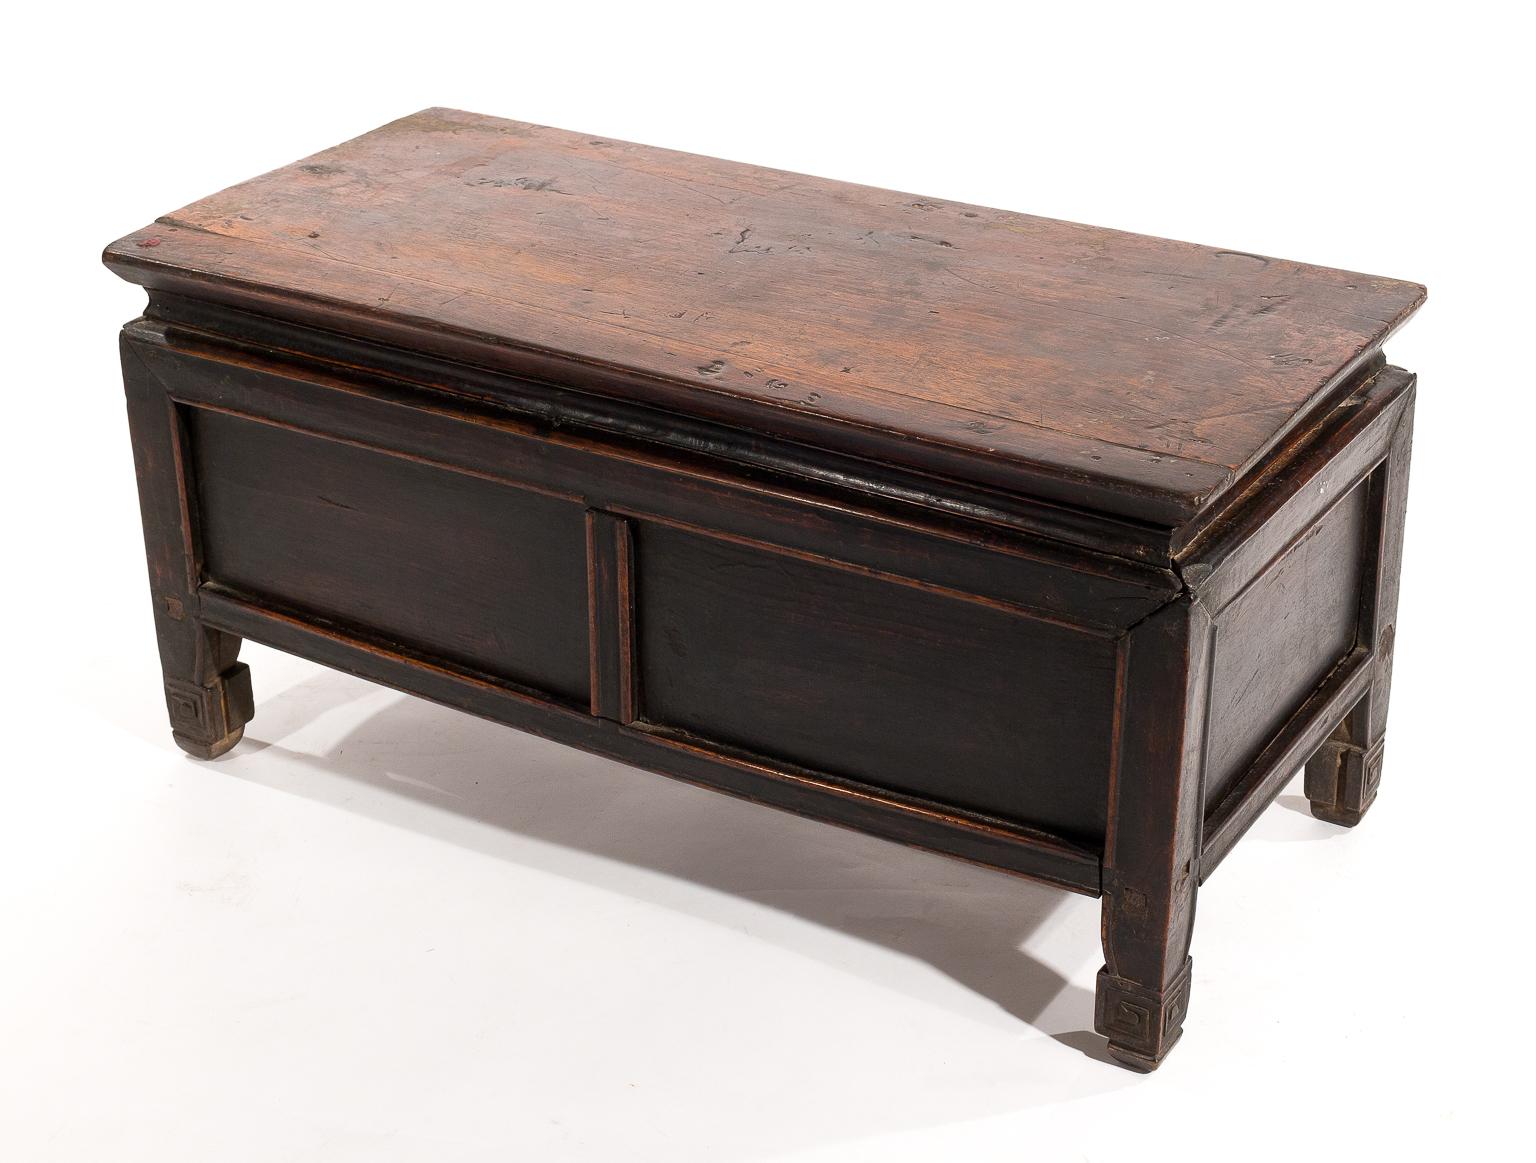 Totally handmade from beautiful hardwood with lots of patina, surface markings and cool vibe from over a century's use in Tibet. This piece is beautifully crafted with all dovetails wood details.